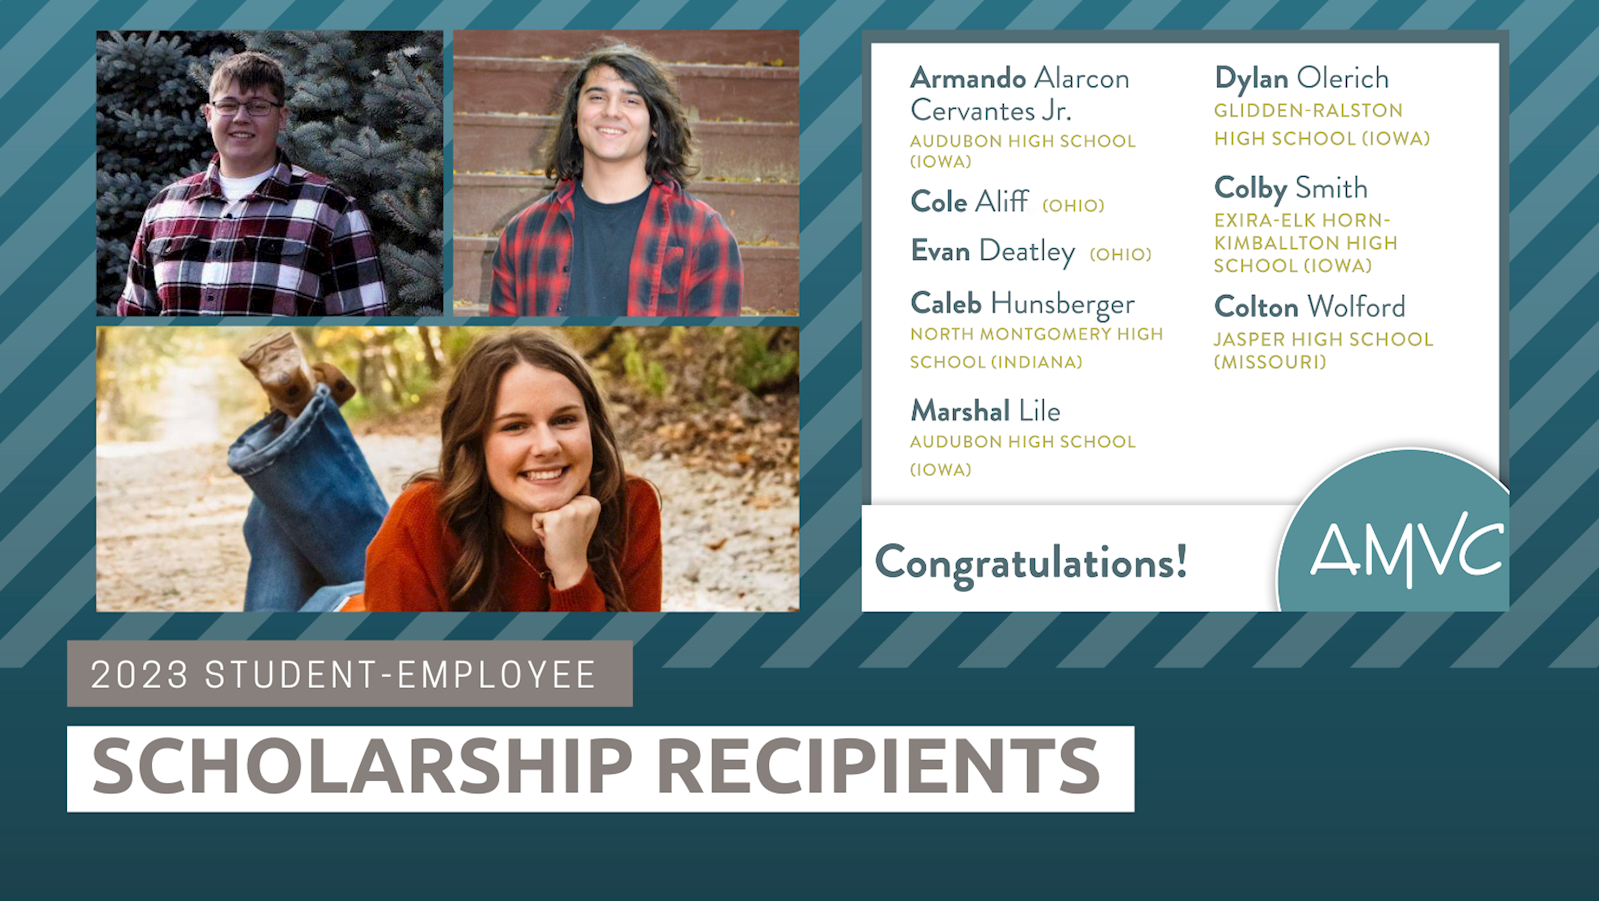 AMVC Presents 11 Scholarships to Student-Employees